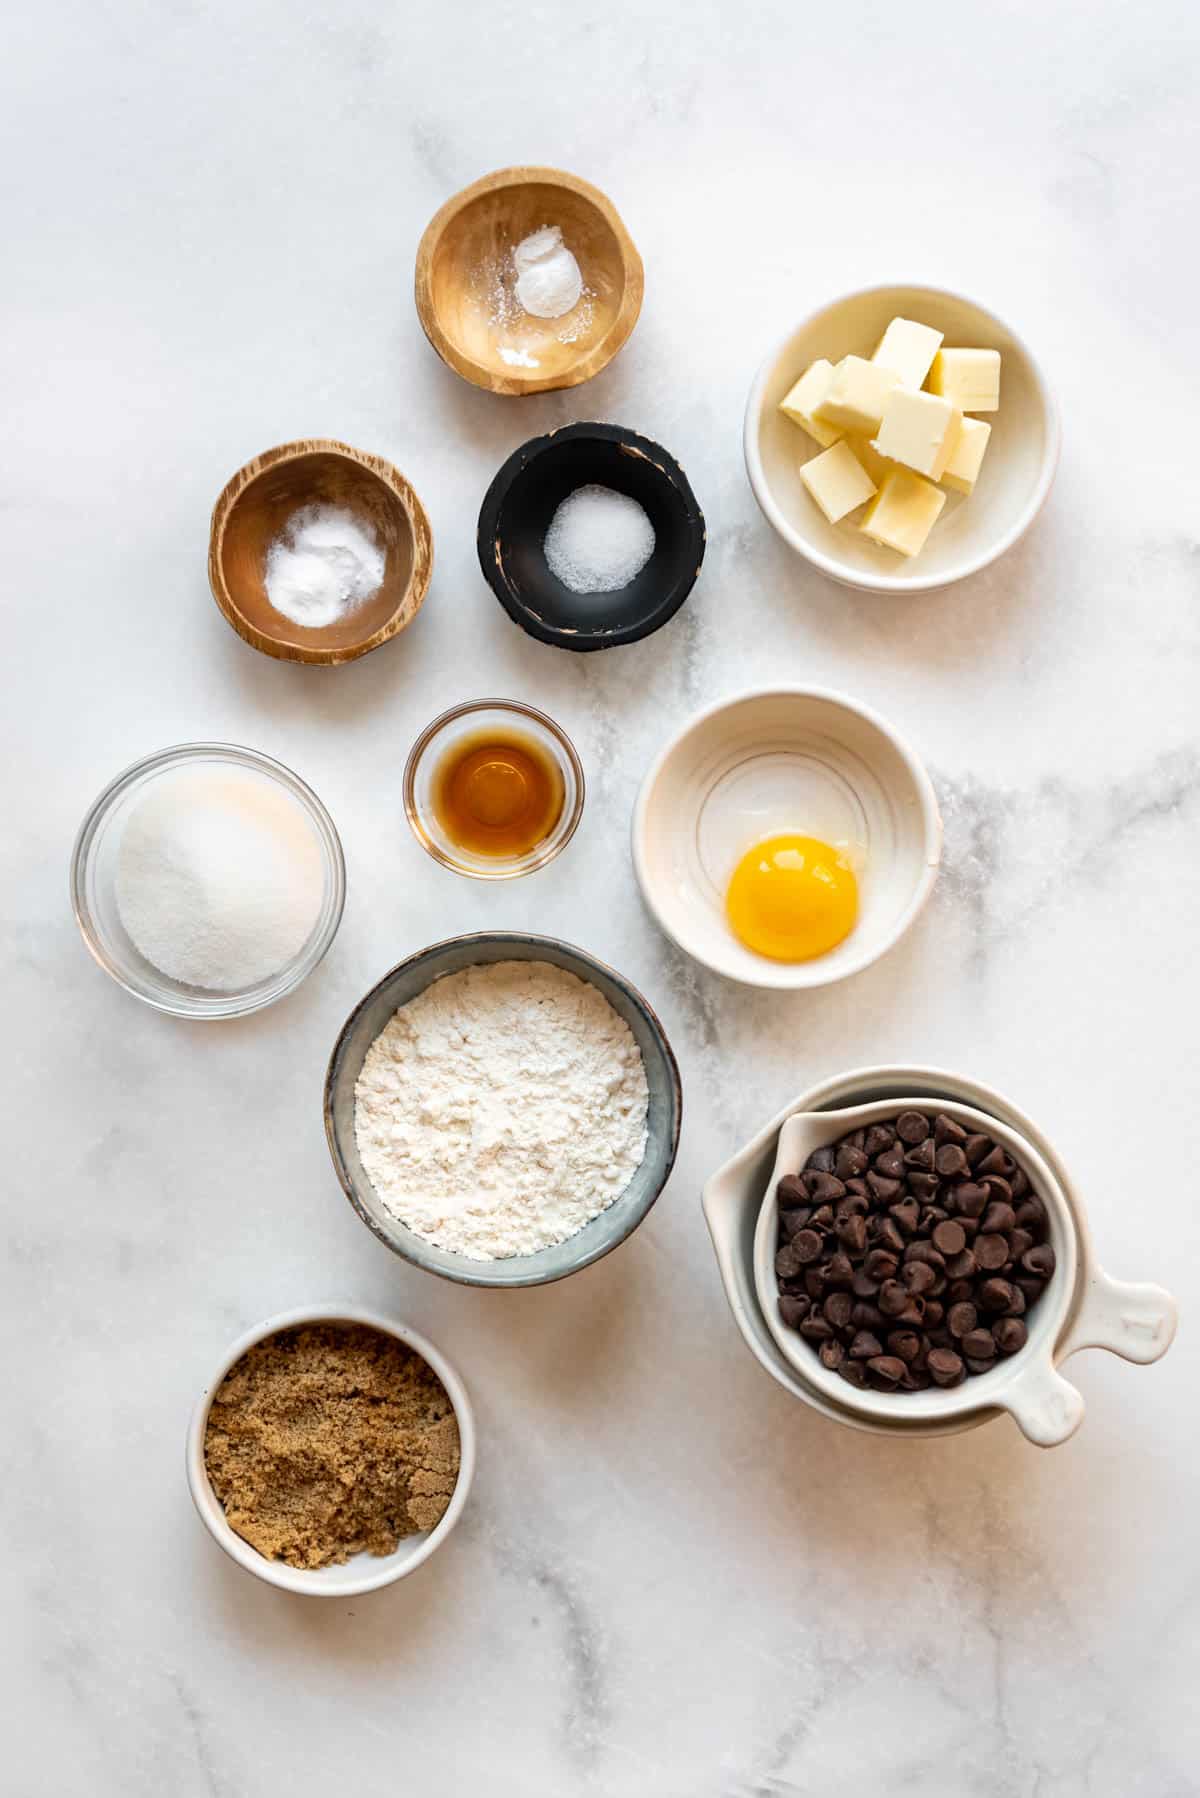 Ingredients for a small batch of chocolate chip cookies.